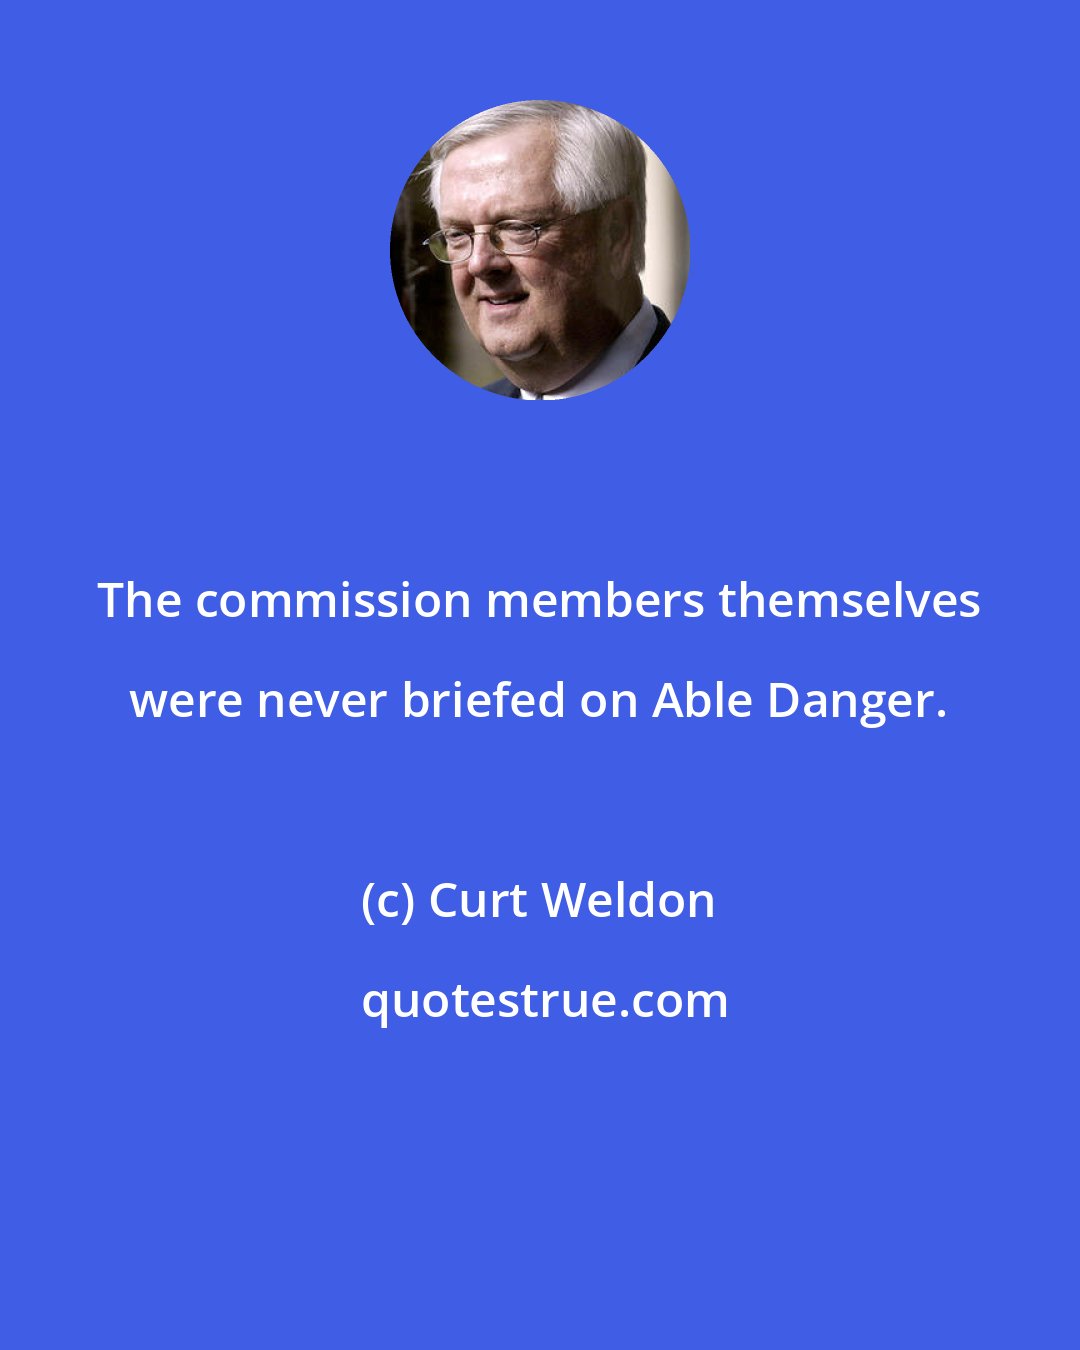 Curt Weldon: The commission members themselves were never briefed on Able Danger.